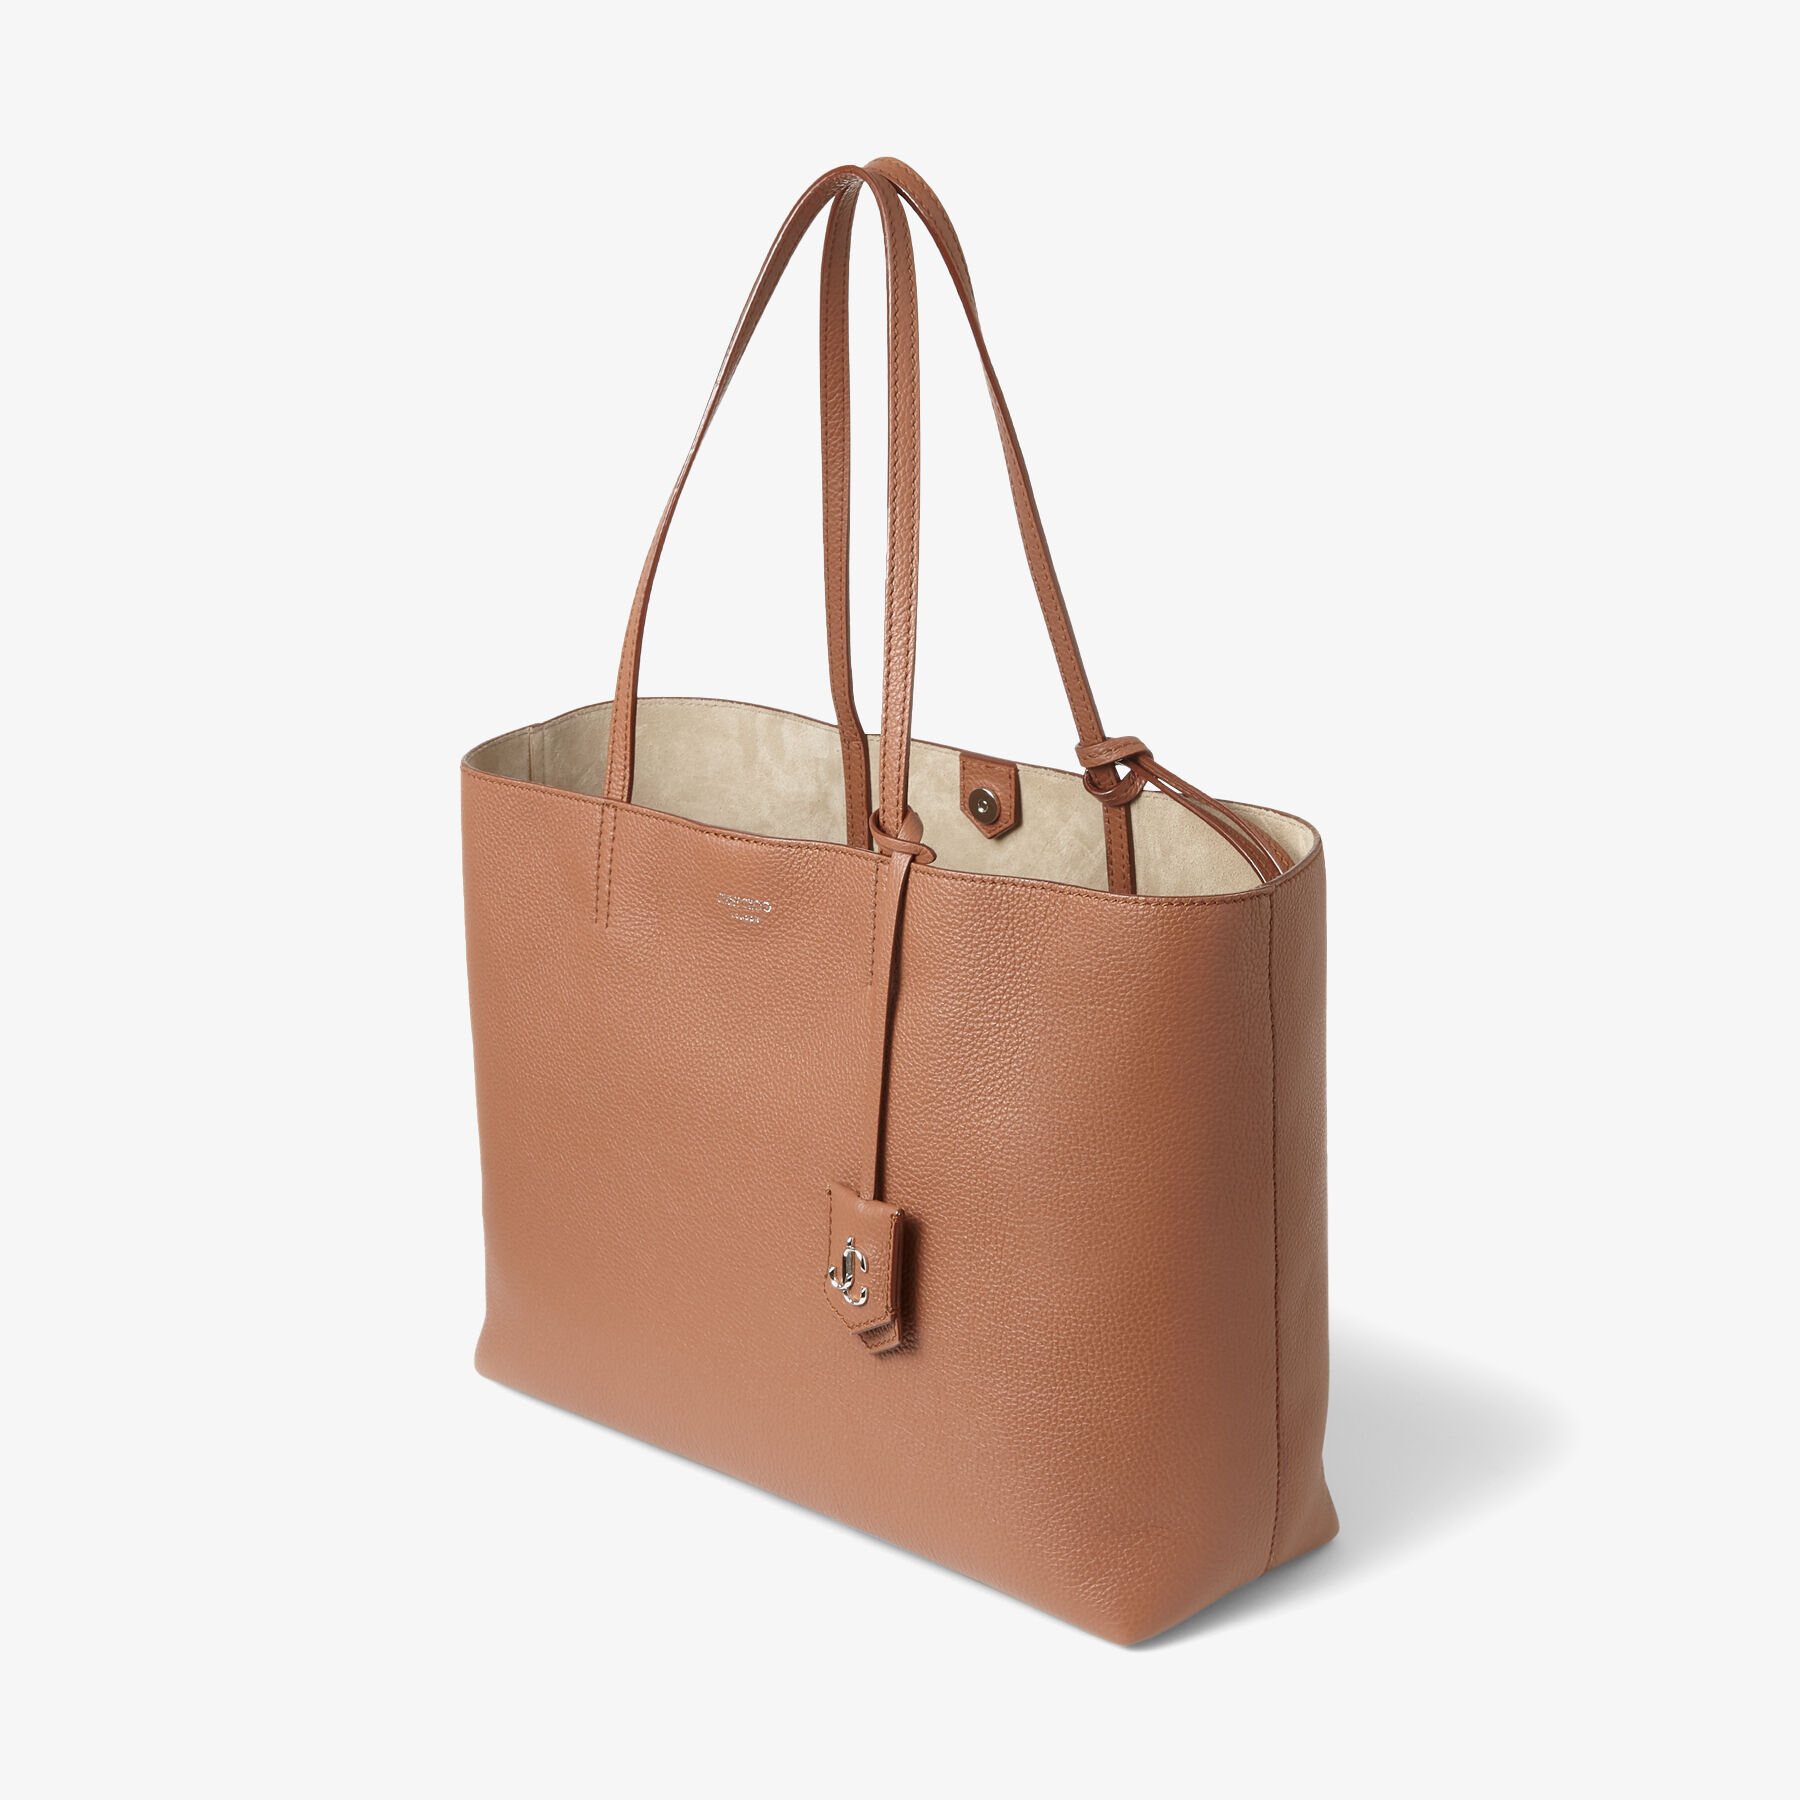 Cuoio Grained Calf Leather Tote Handbag with JC Emblem | NINE2FIVE 